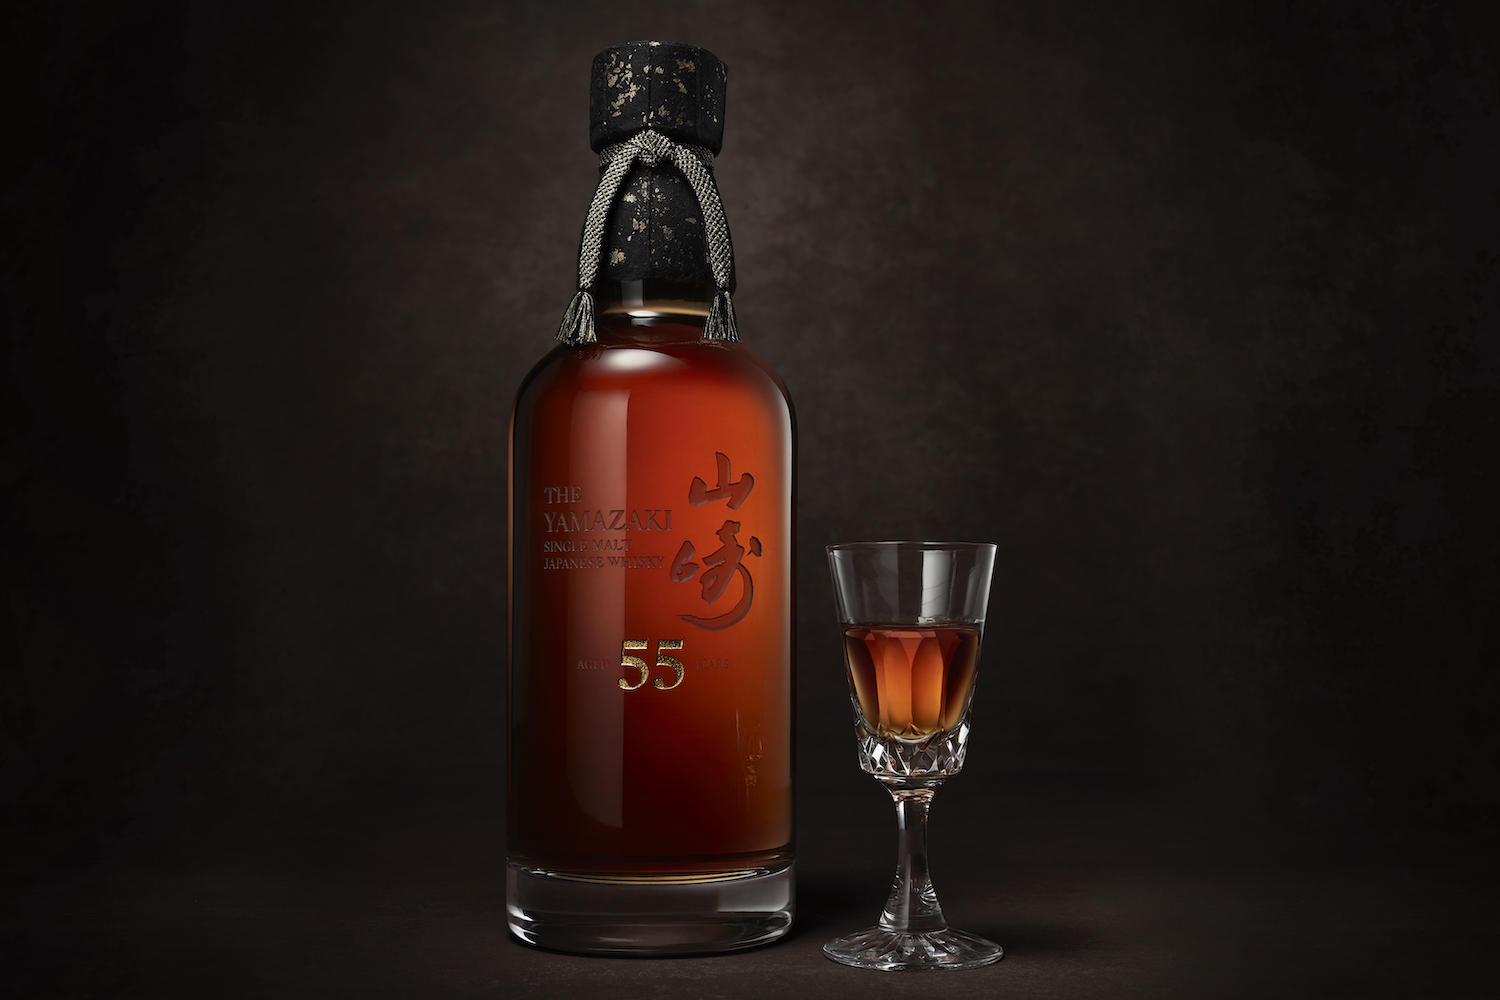 Yamazaki 55 Whisky Review: The World’s Oldest & Most Expensive Japanese Whisky